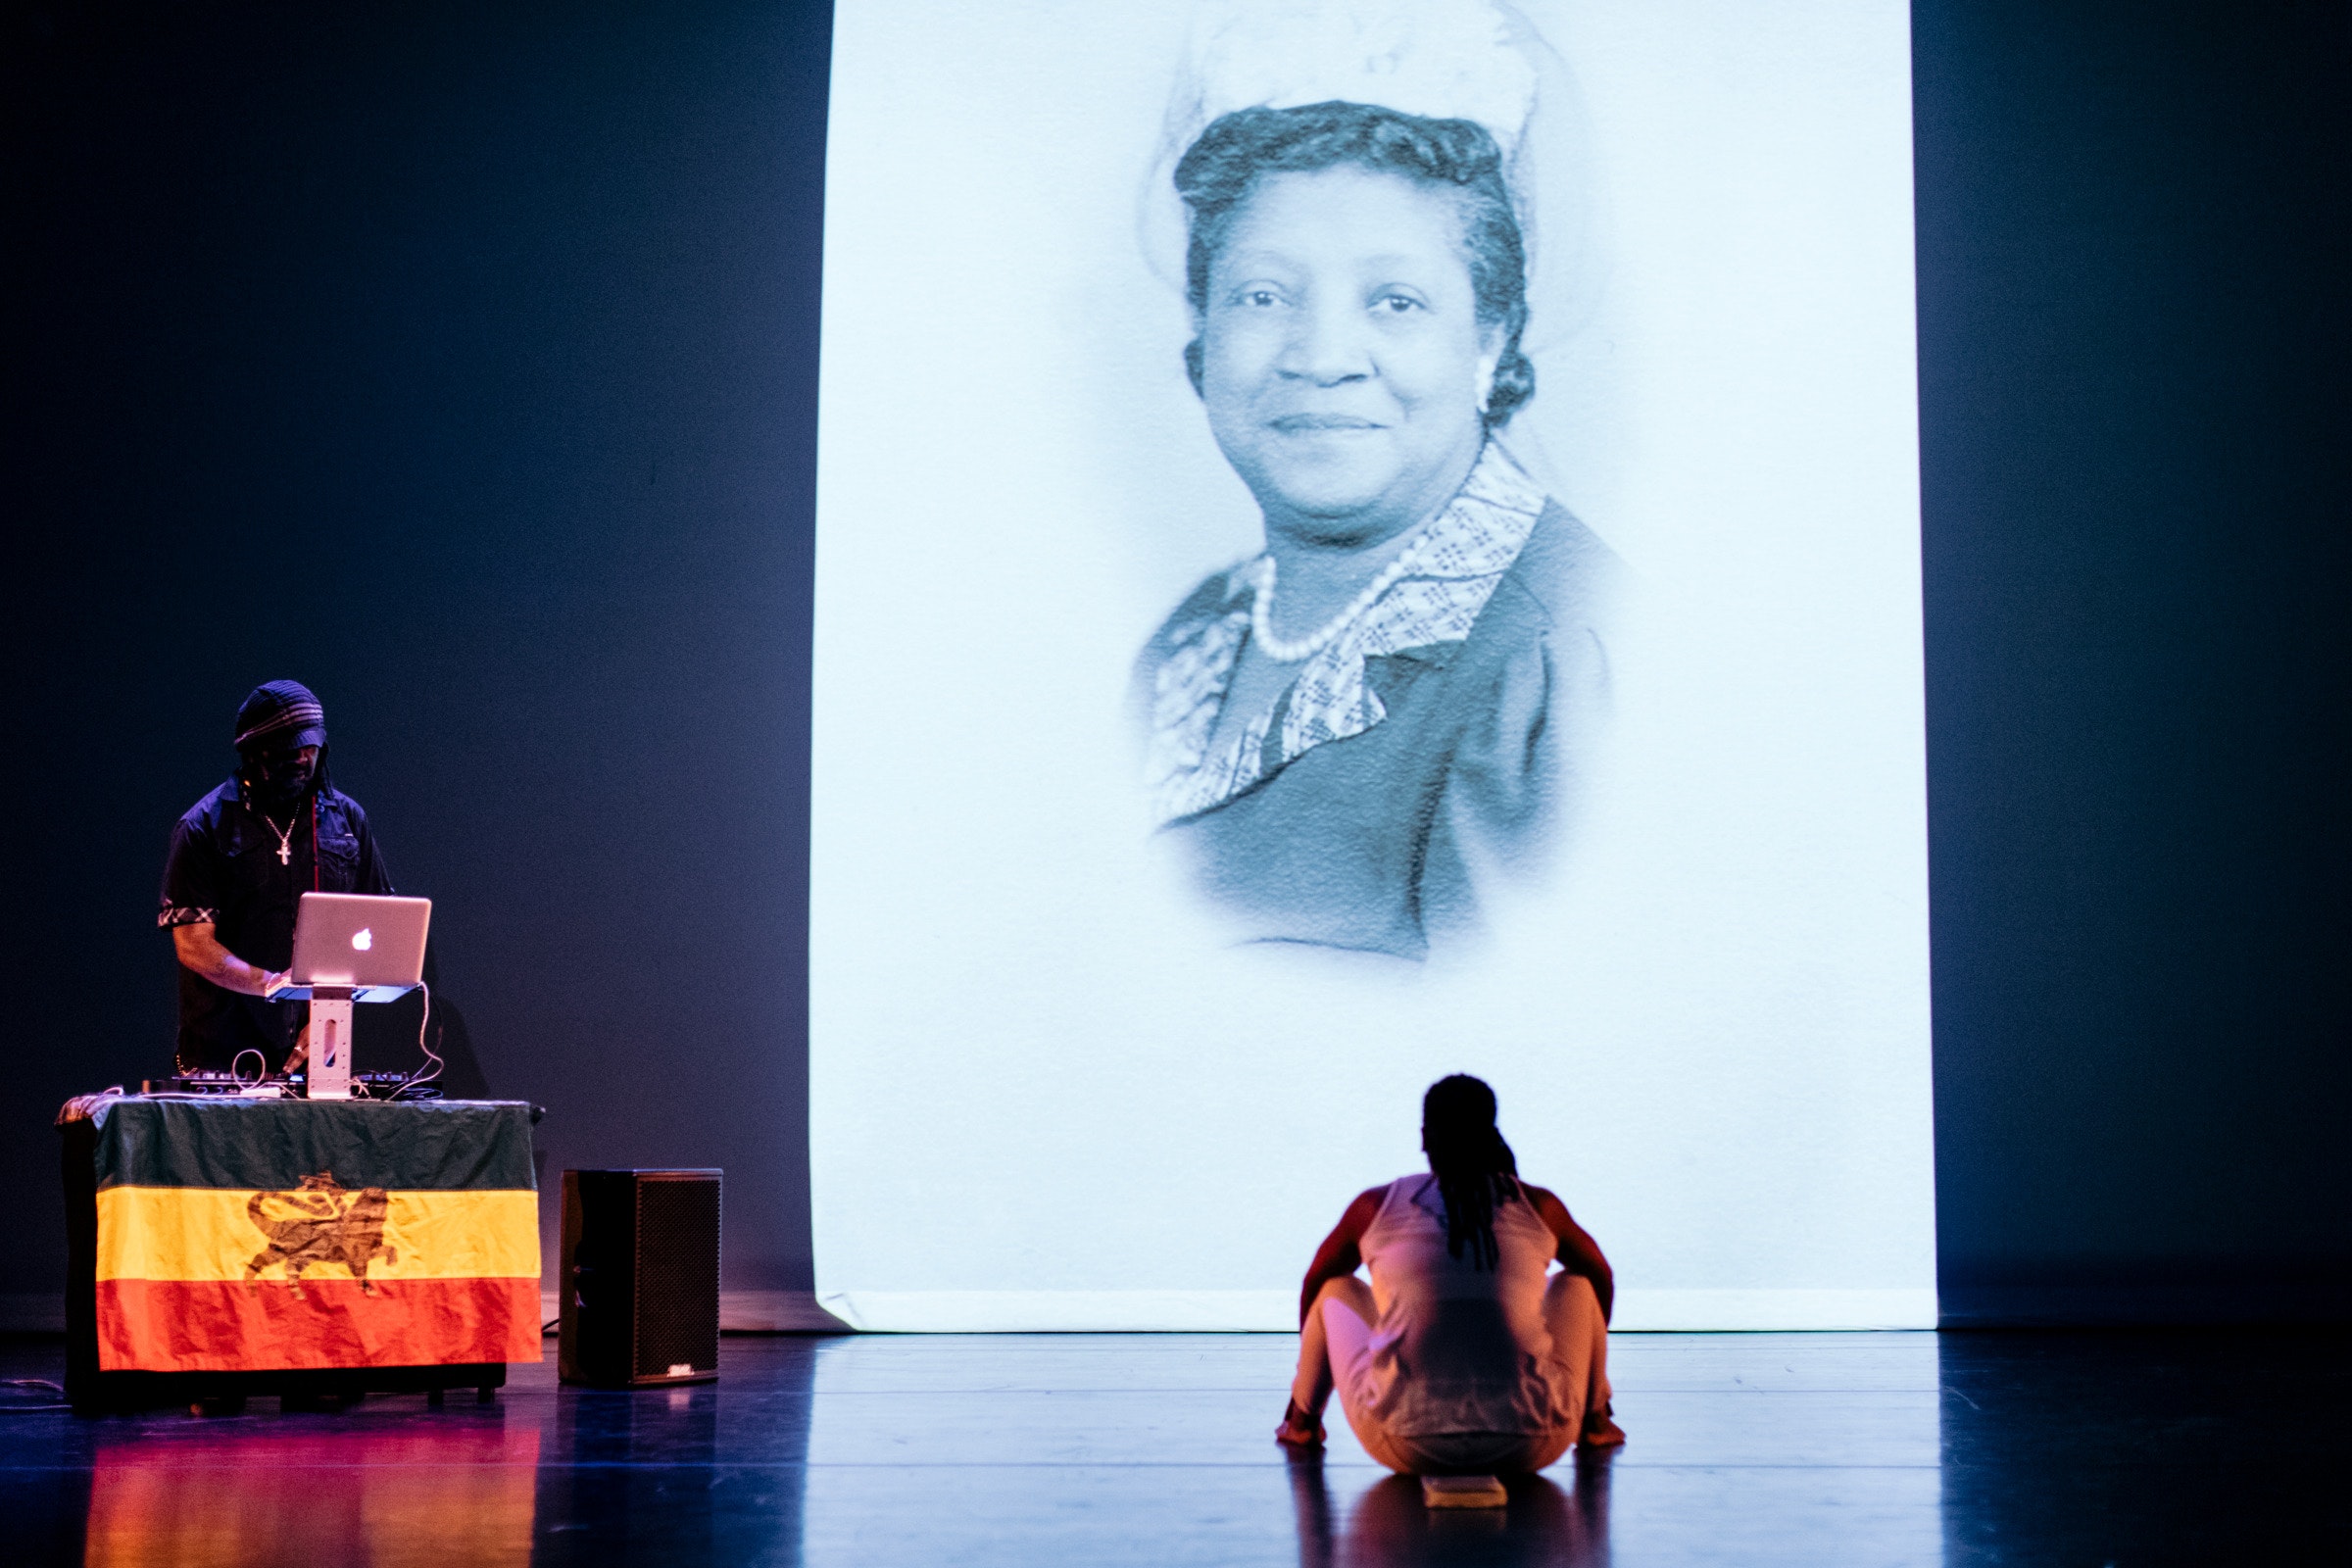 A woman sits on stage with her back to the viewer and watches projected images of old photographs of women while a man DJ's from a table nearbby.